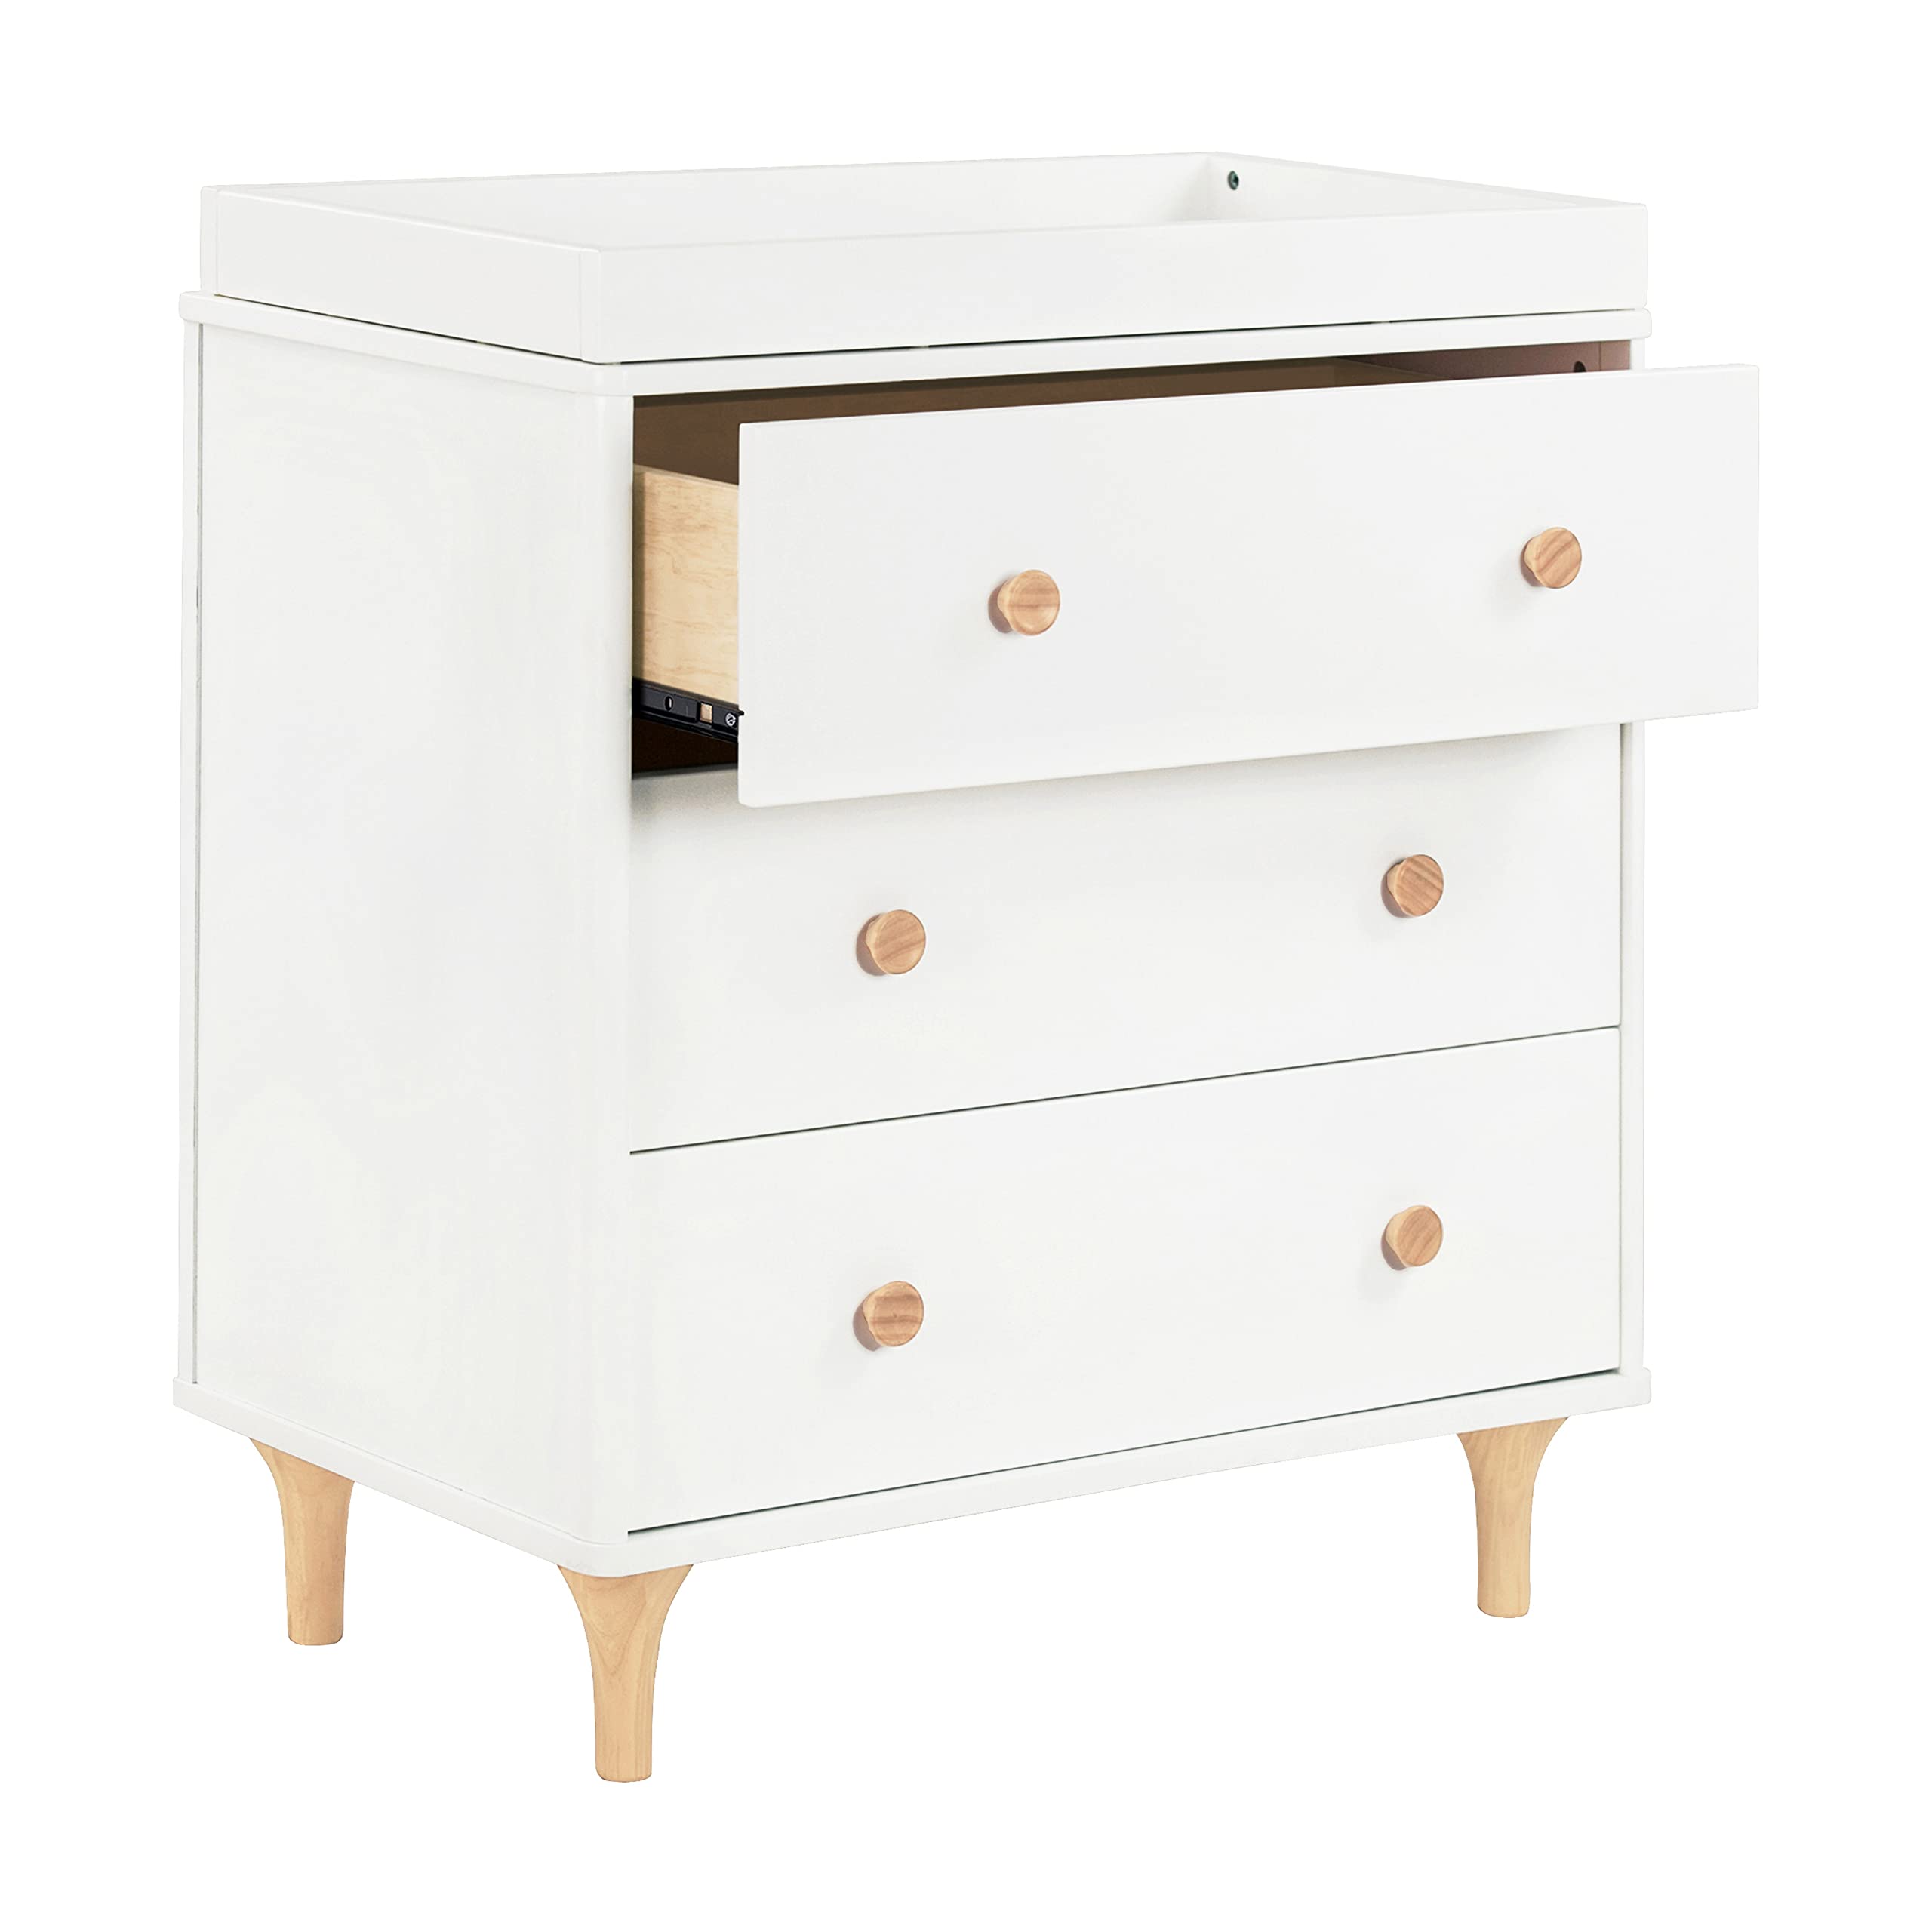 Babyletto Lolly 3-Drawer Changer Dresser with Removable Changing Tray in White and Natural, Greenguard Gold Certified